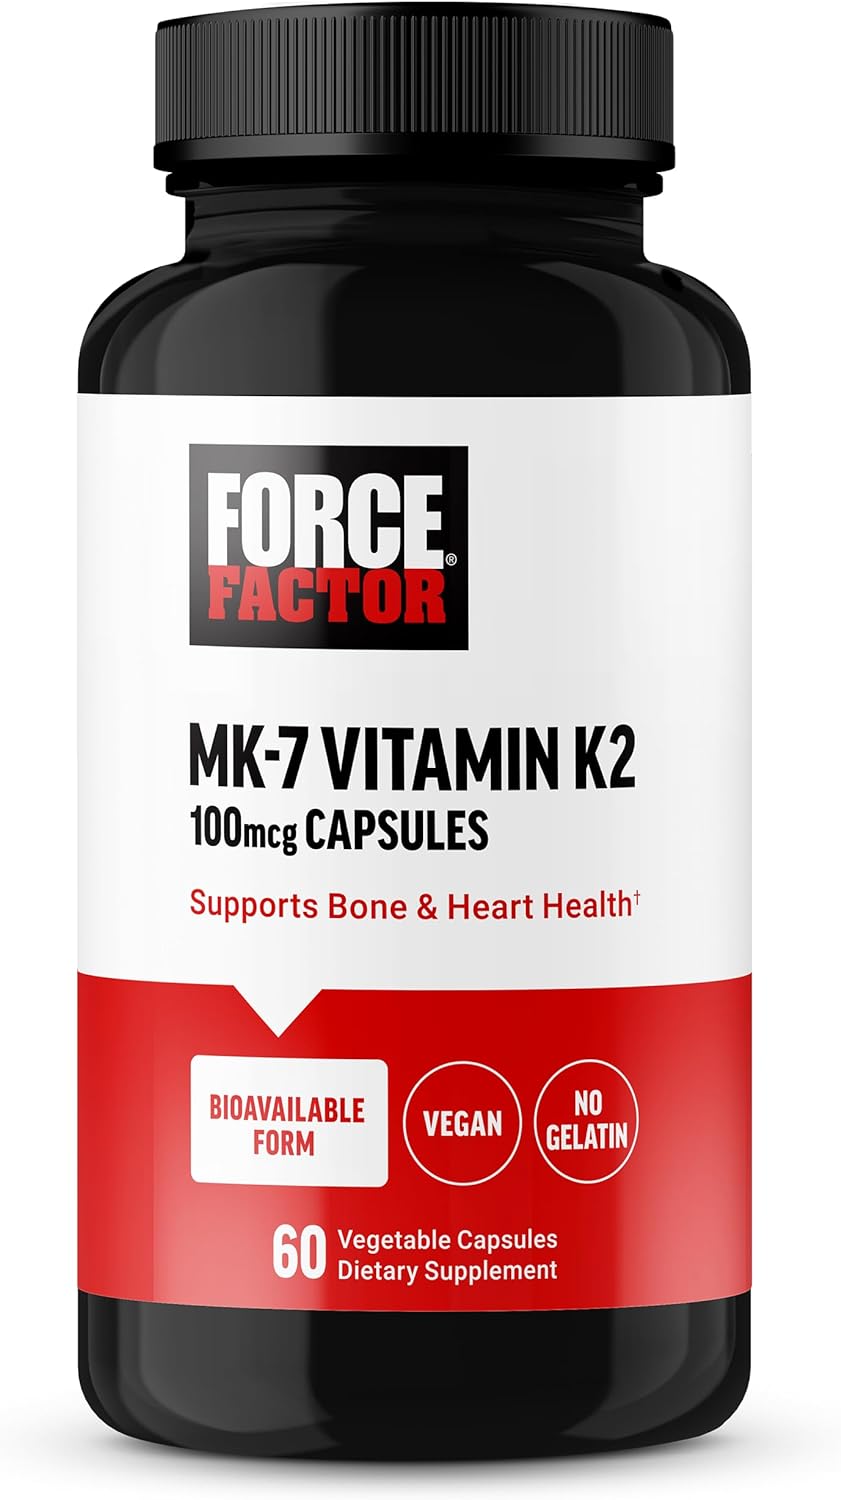 FORCE FACTOR MK-7 Vitamin K2 100mcg, Bone Support Supplements for Women and Men, Support Heart Health, Bone Density, and More, BIoavailable Form, Vegan, Non-GMO, 60 Vegetable Capsules